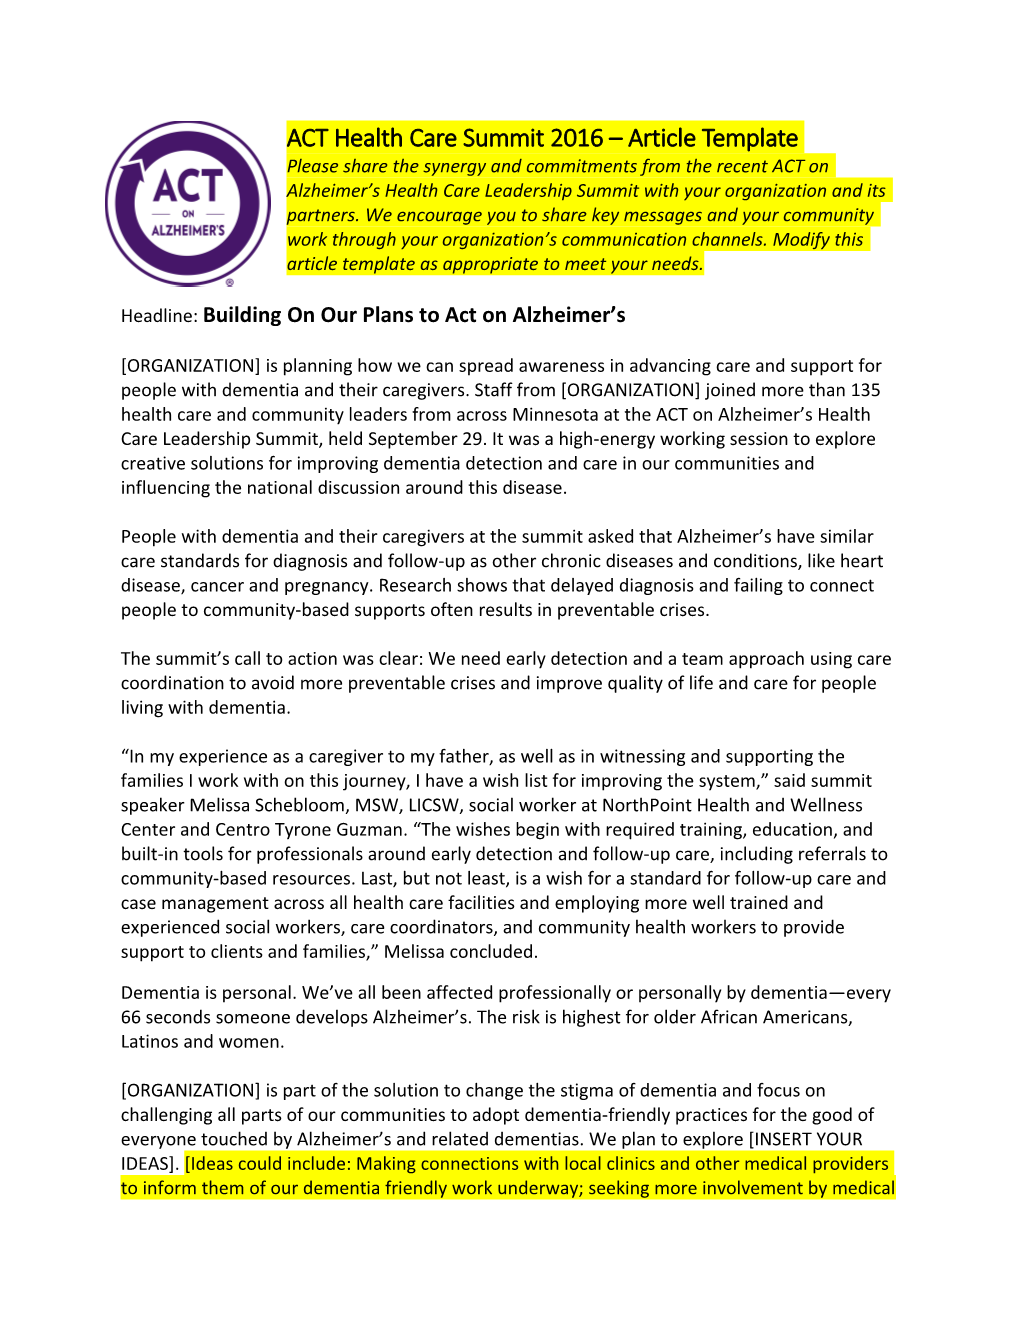 ACT Summit 2016 Article Template